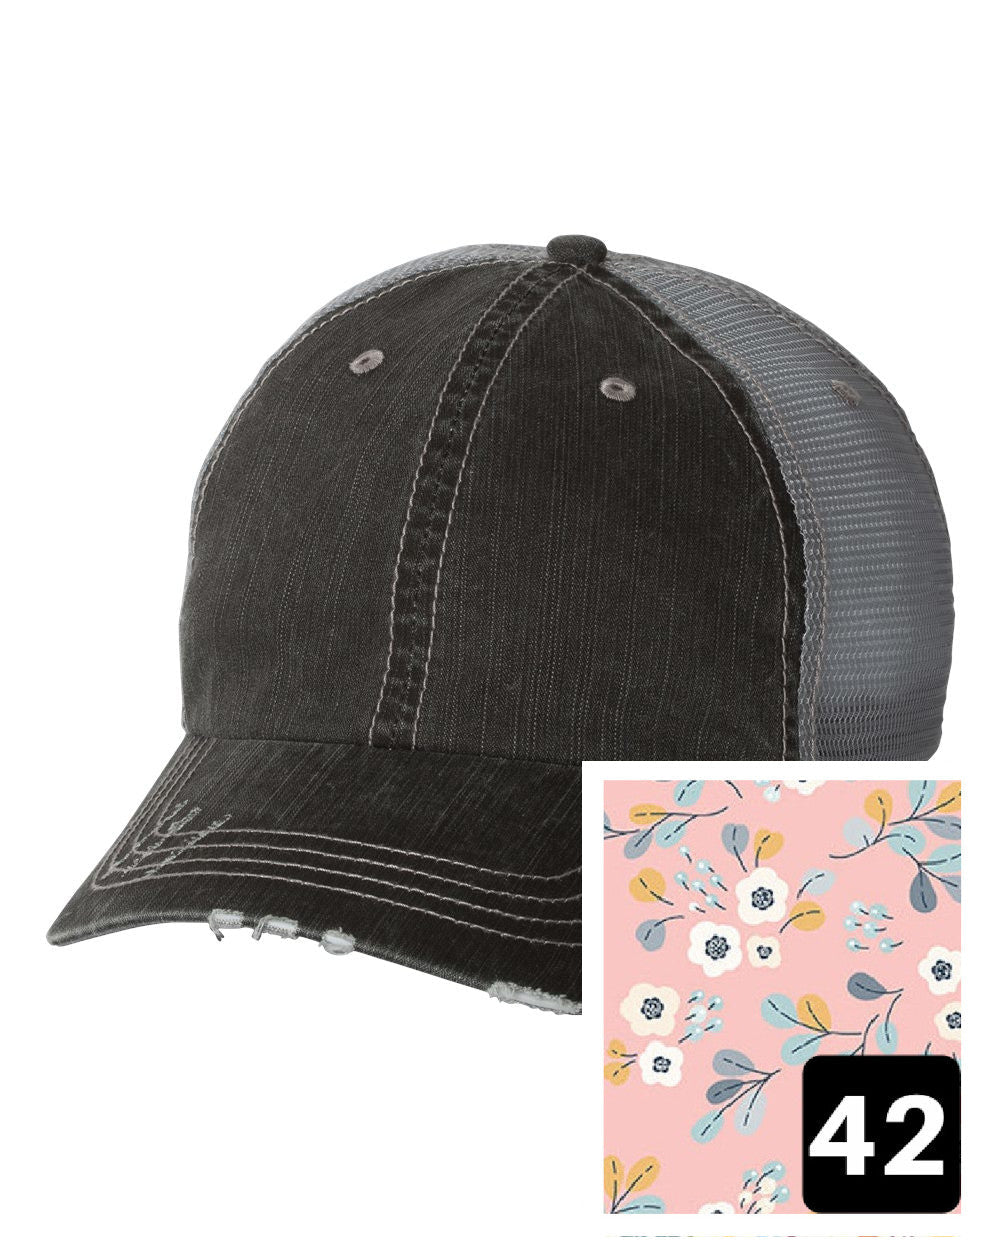 gray distressed trucker hat with light blue and pink mosaic fabric state of Florida